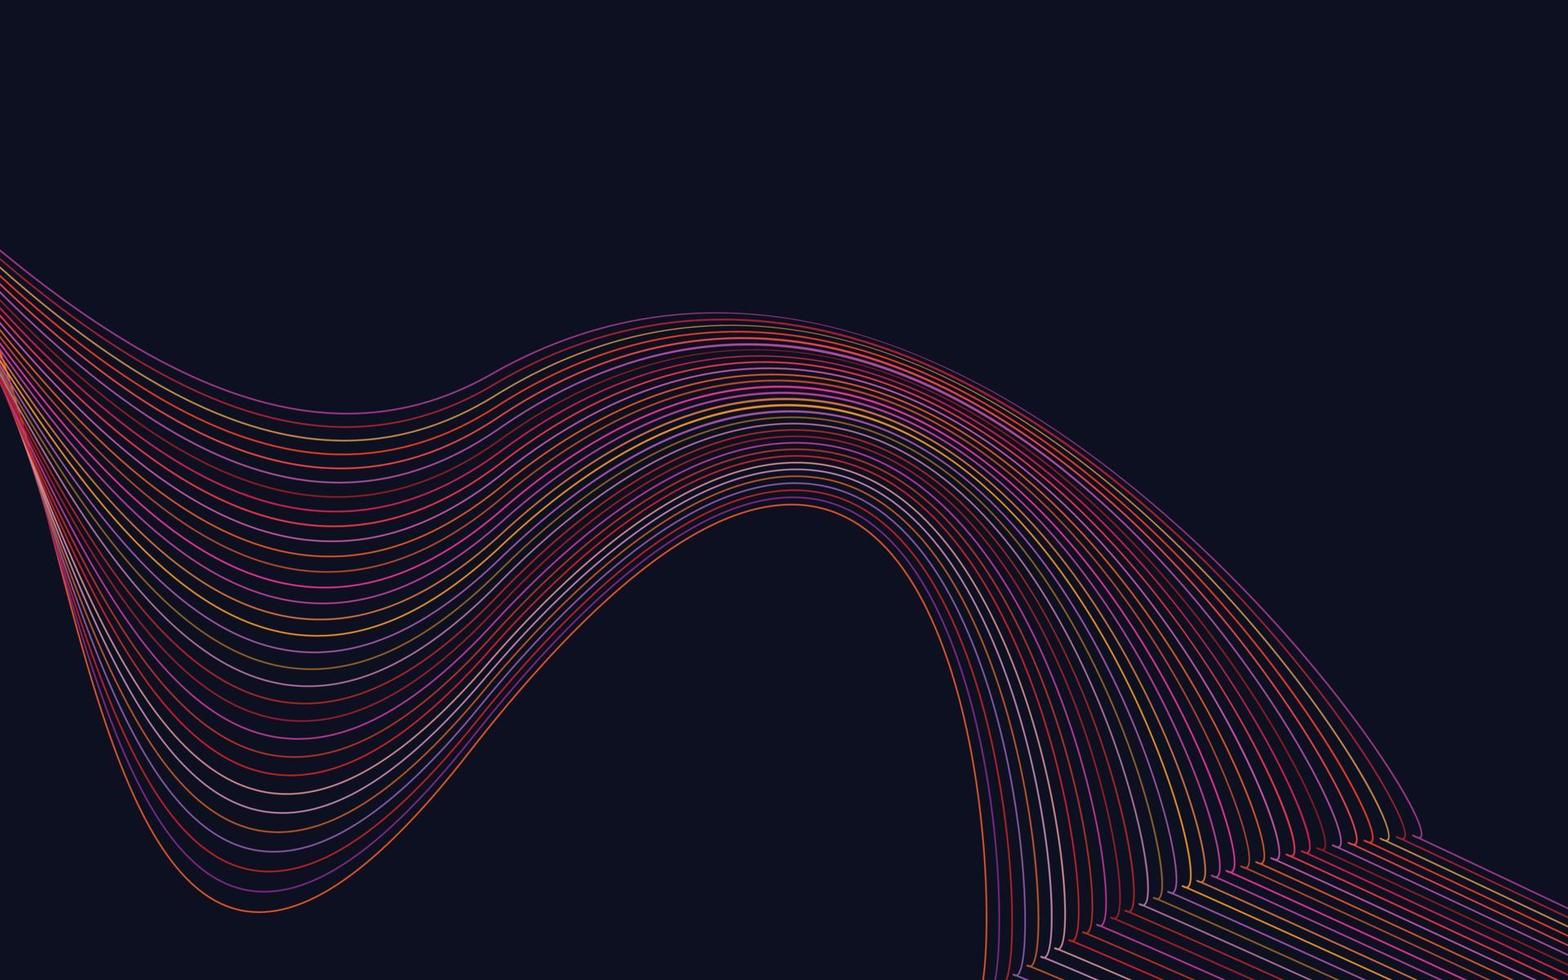 Wave of the Red colored lines. High resolution vector